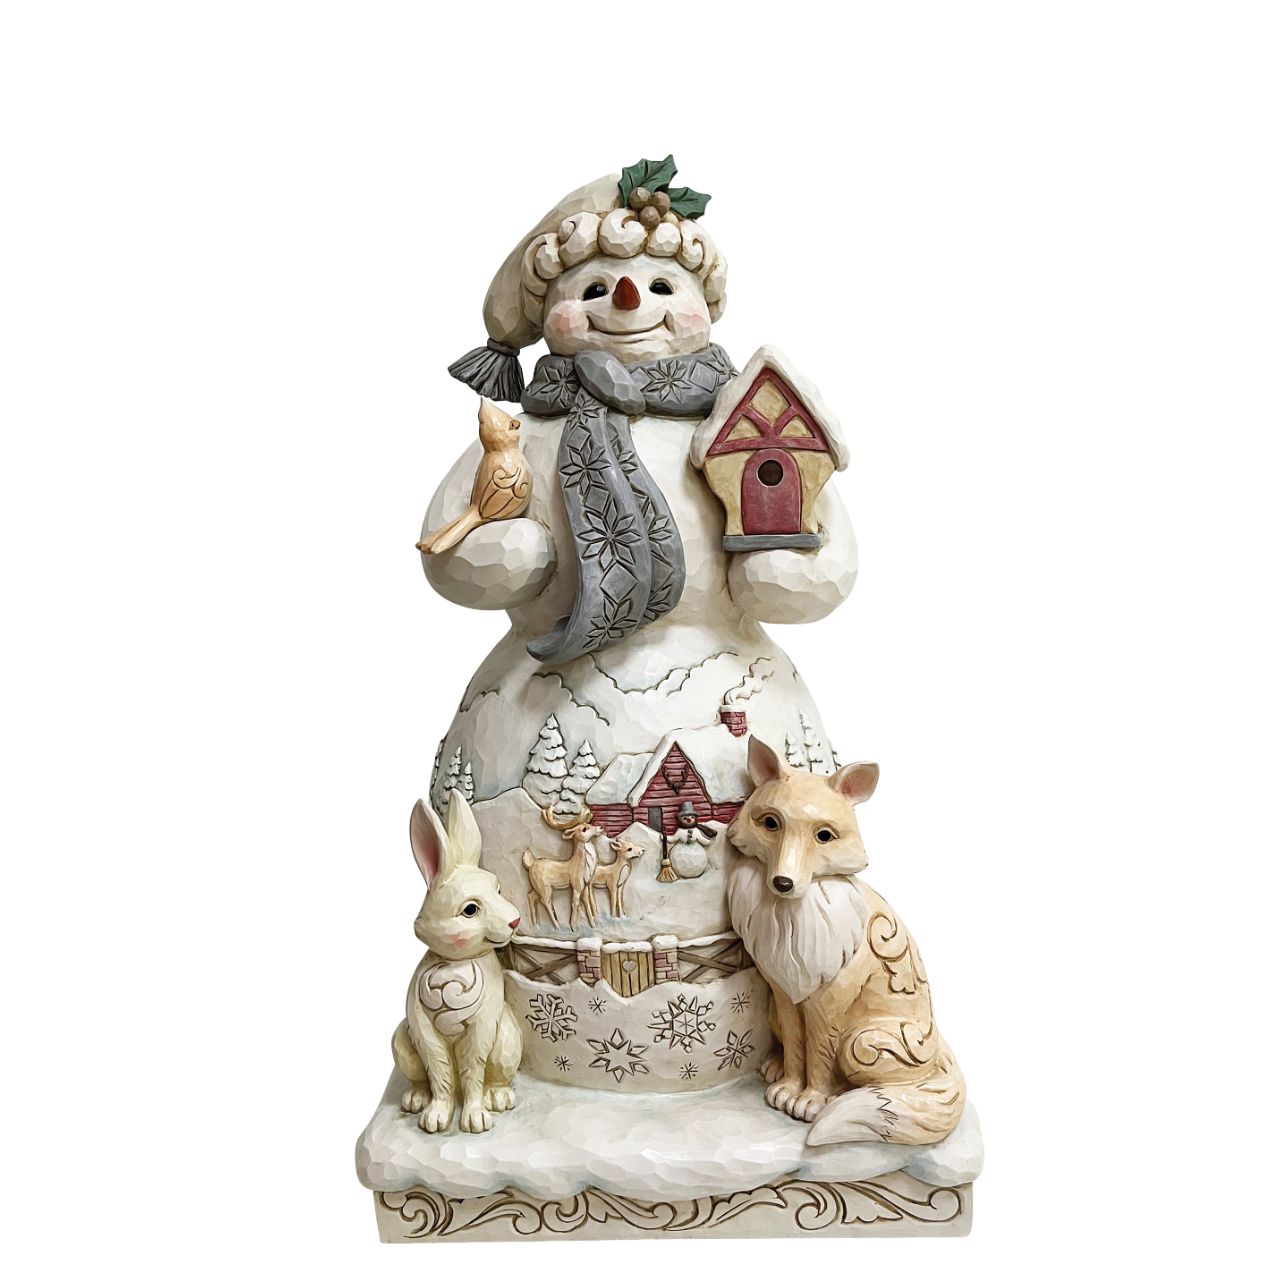 Jim Shore White Woodland Collection Snowman and Animals Statue  The White Woodland Collection showcases Intricate Jim Shore designs, with soft neutral colour palette suitable for many styles of home décor. This Statue size Snowman with woodland animals is the showstopper of this collection and would make the most delightful show stopping feature in any home.